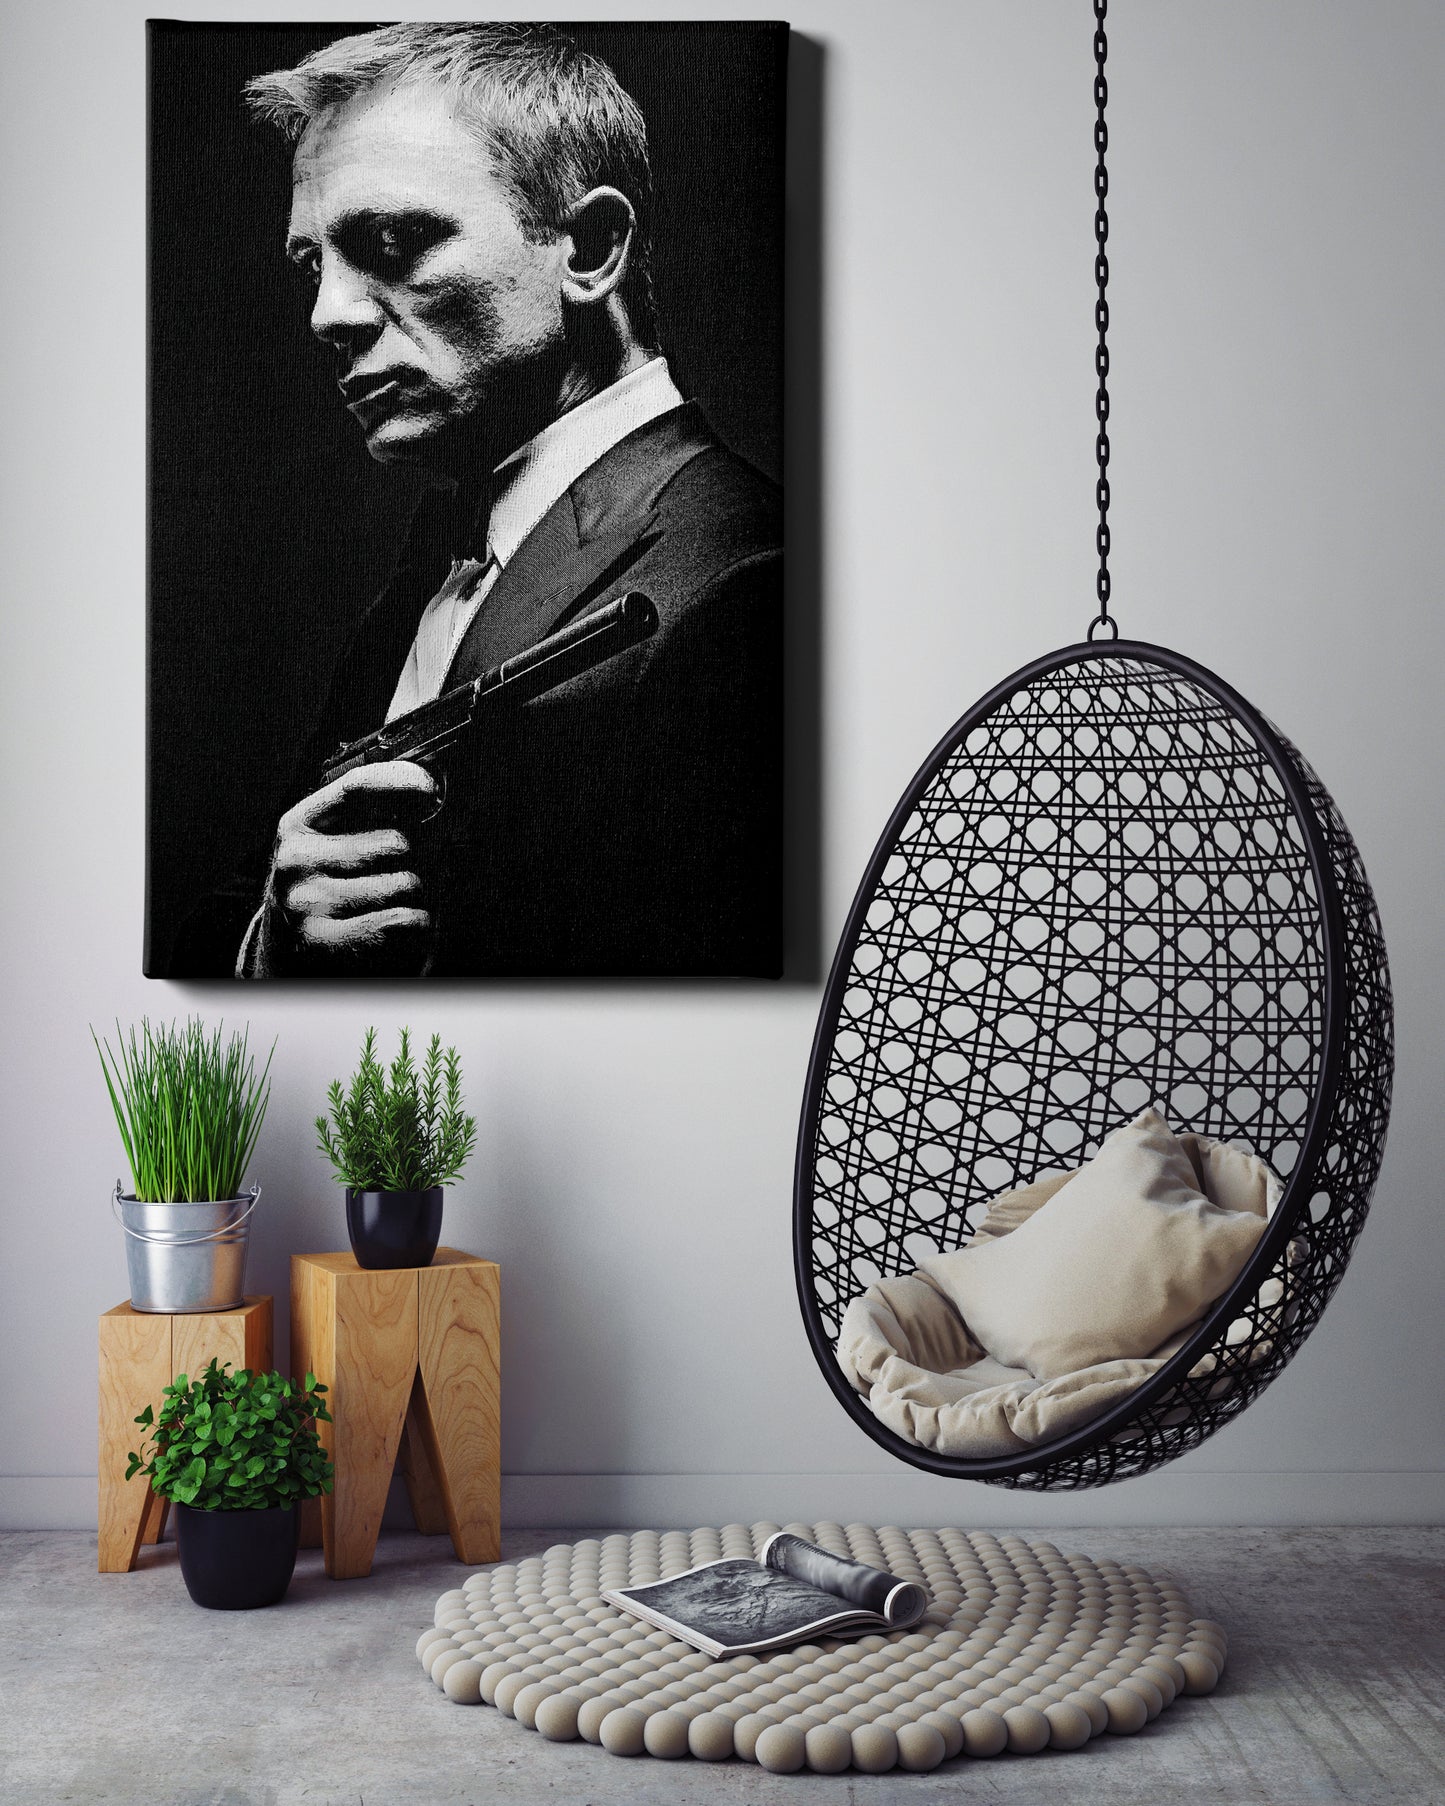 James Bond Poster Black and White Painting Canvas Wall Art Home Decor Framed Art